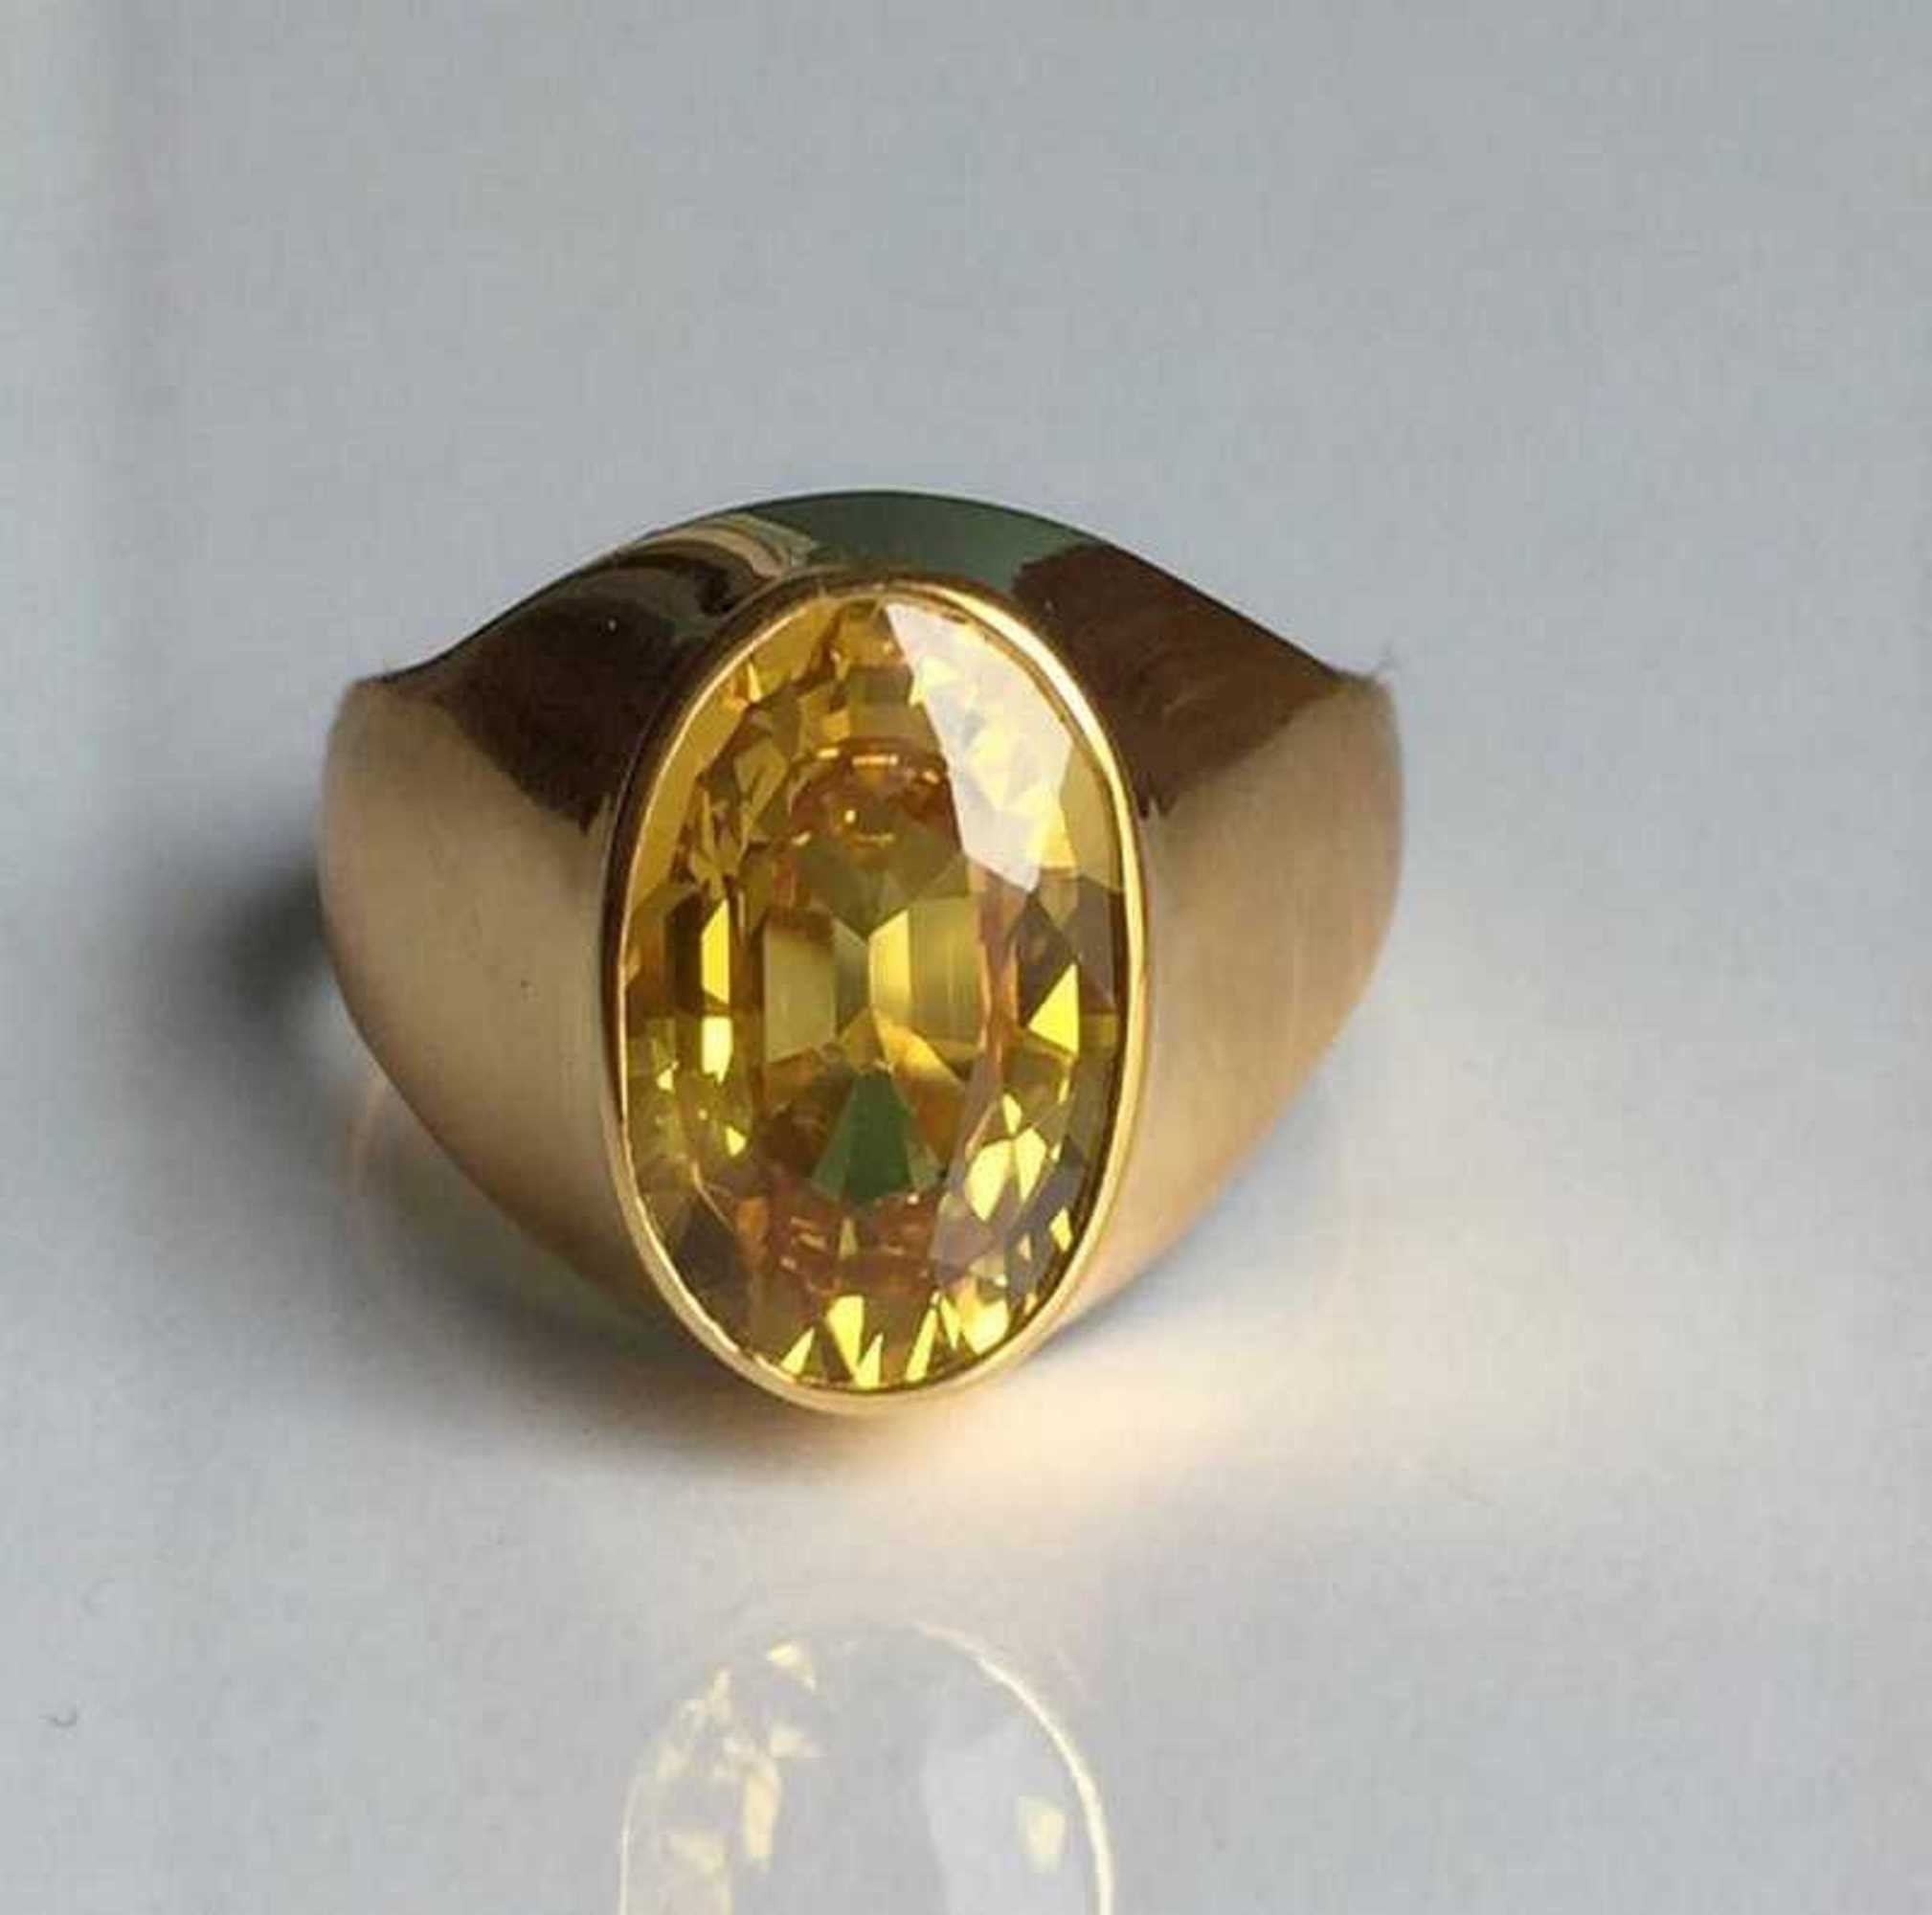 4,358 Yellow Sapphire Ring Images, Stock Photos, 3D objects, & Vectors |  Shutterstock